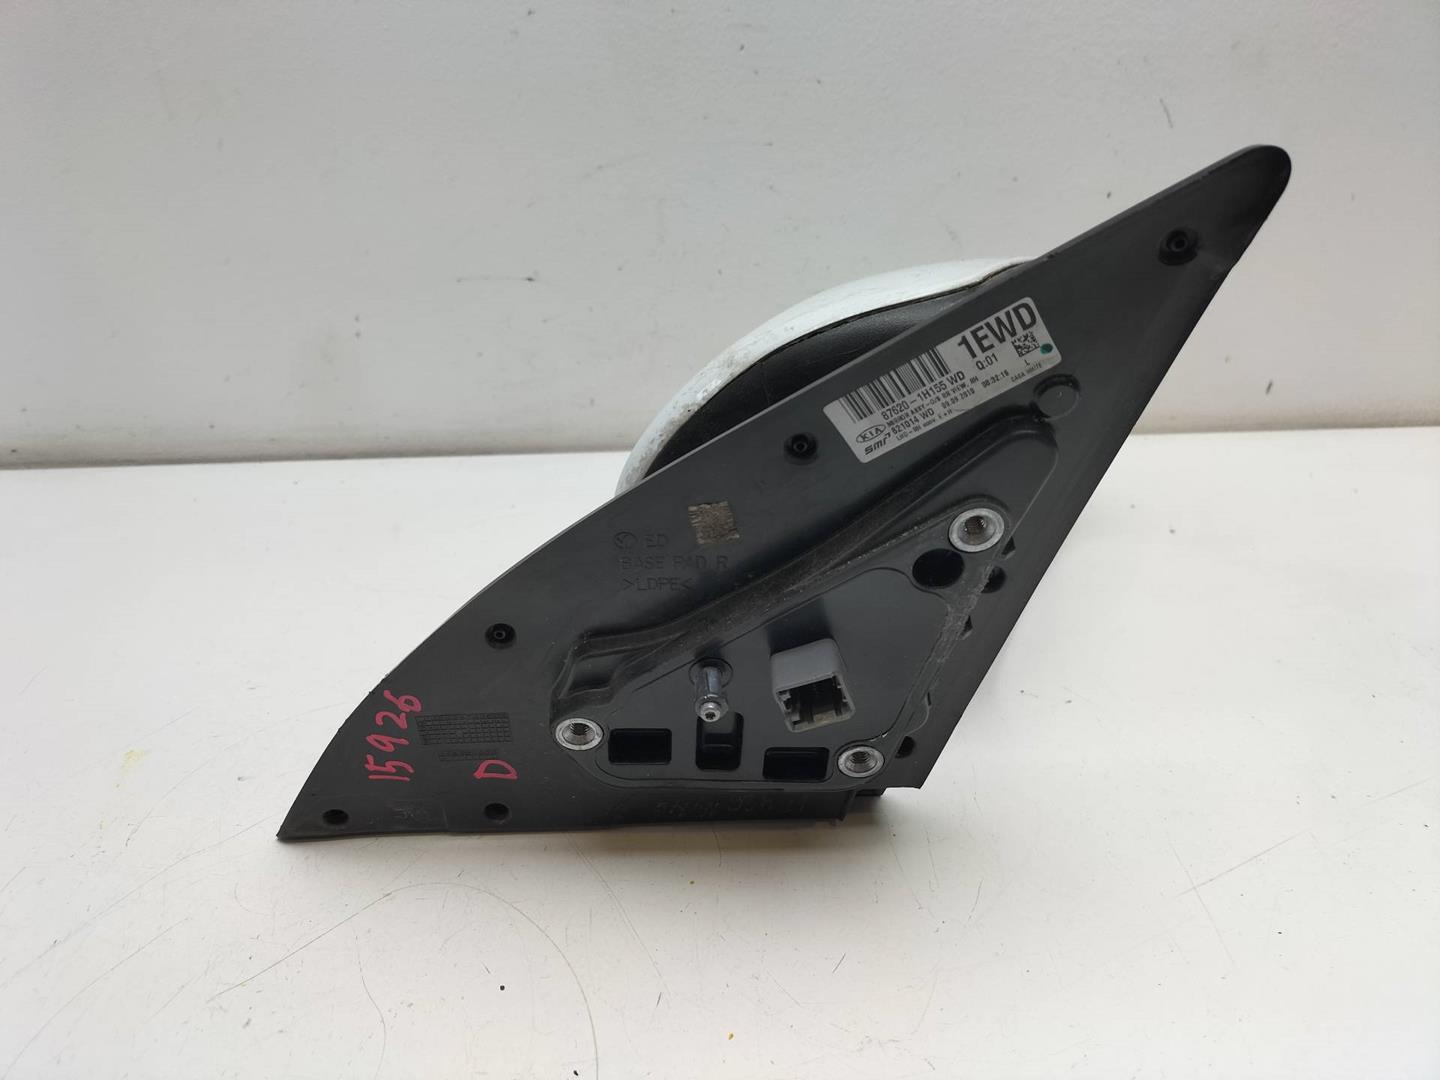 KIA Cee'd 1 generation (2007-2012) Right Side Wing Mirror 876201H155WD, ELECTRICO, 5PINES 19206995